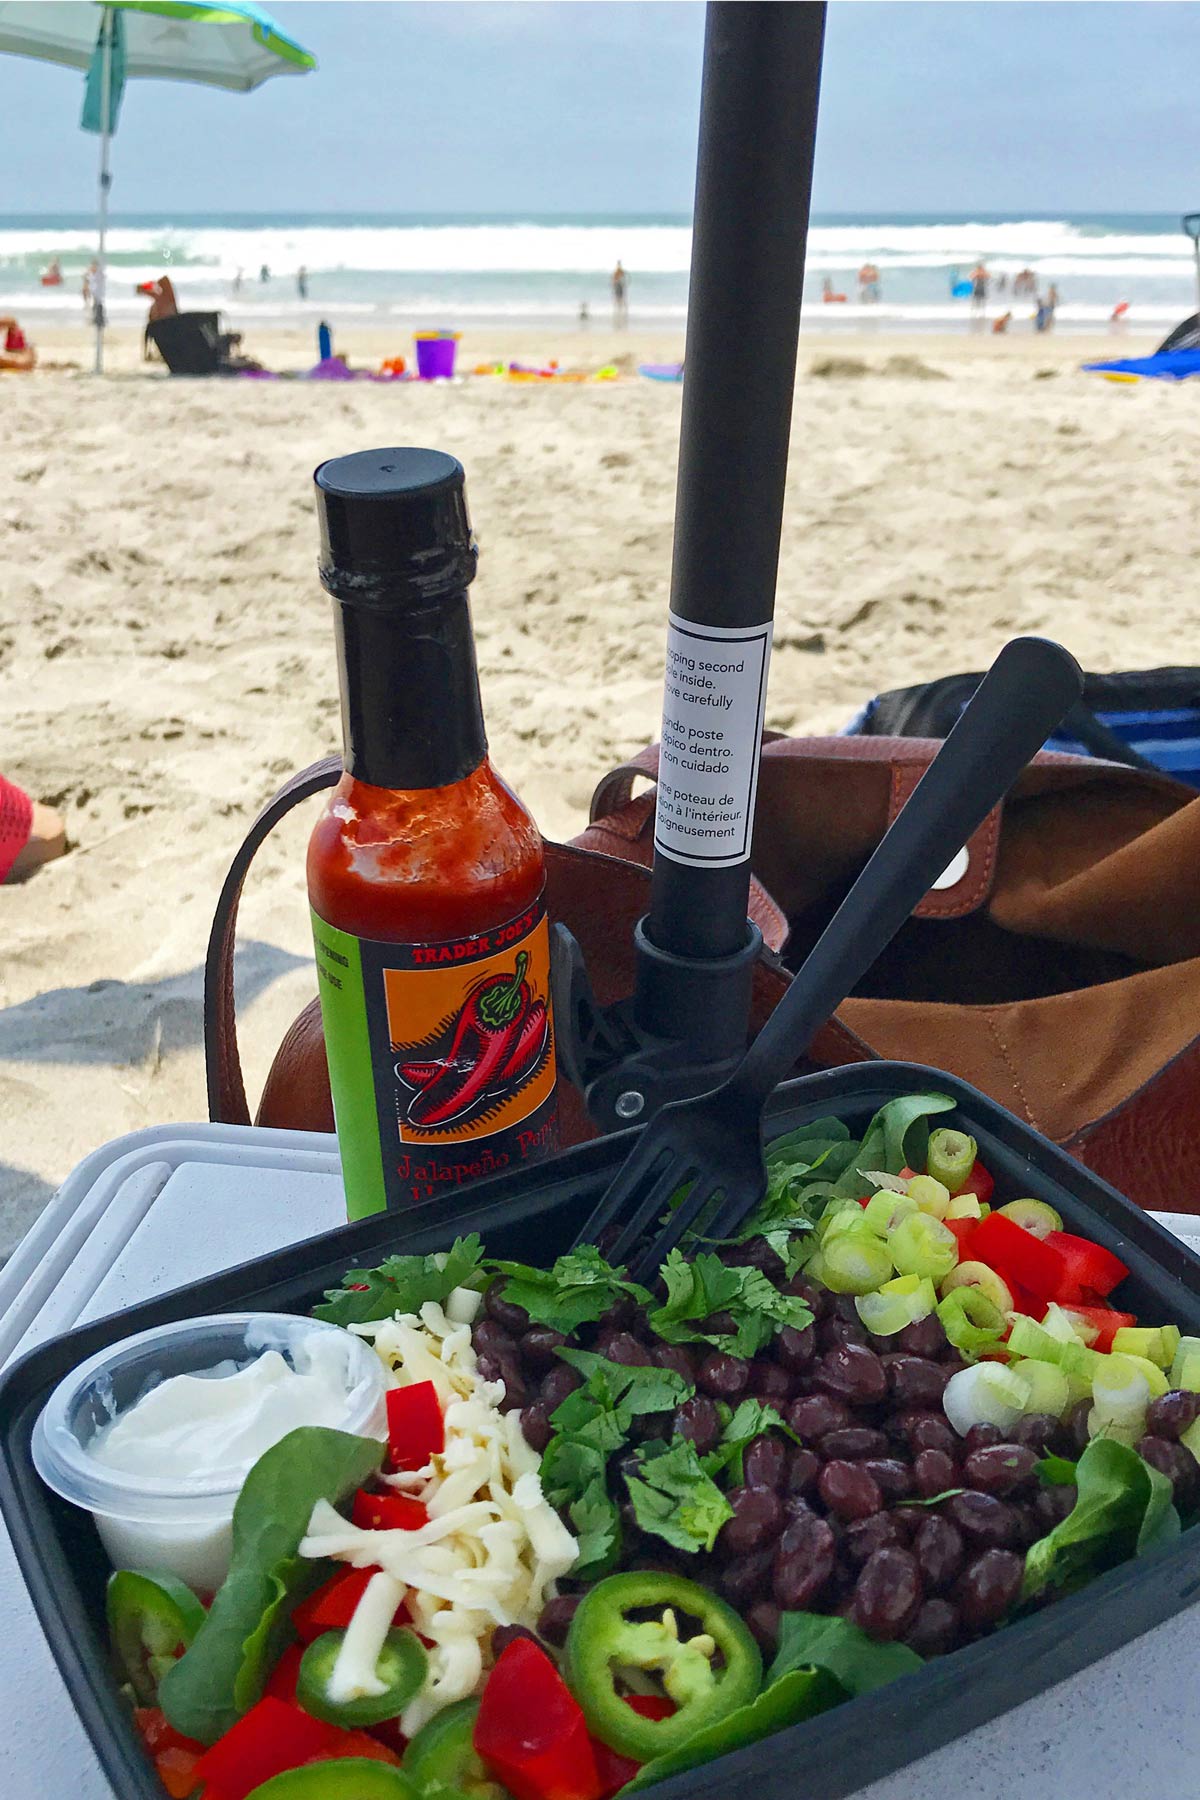 taco salad in meal prep box on cooler under umbrella at the beach.